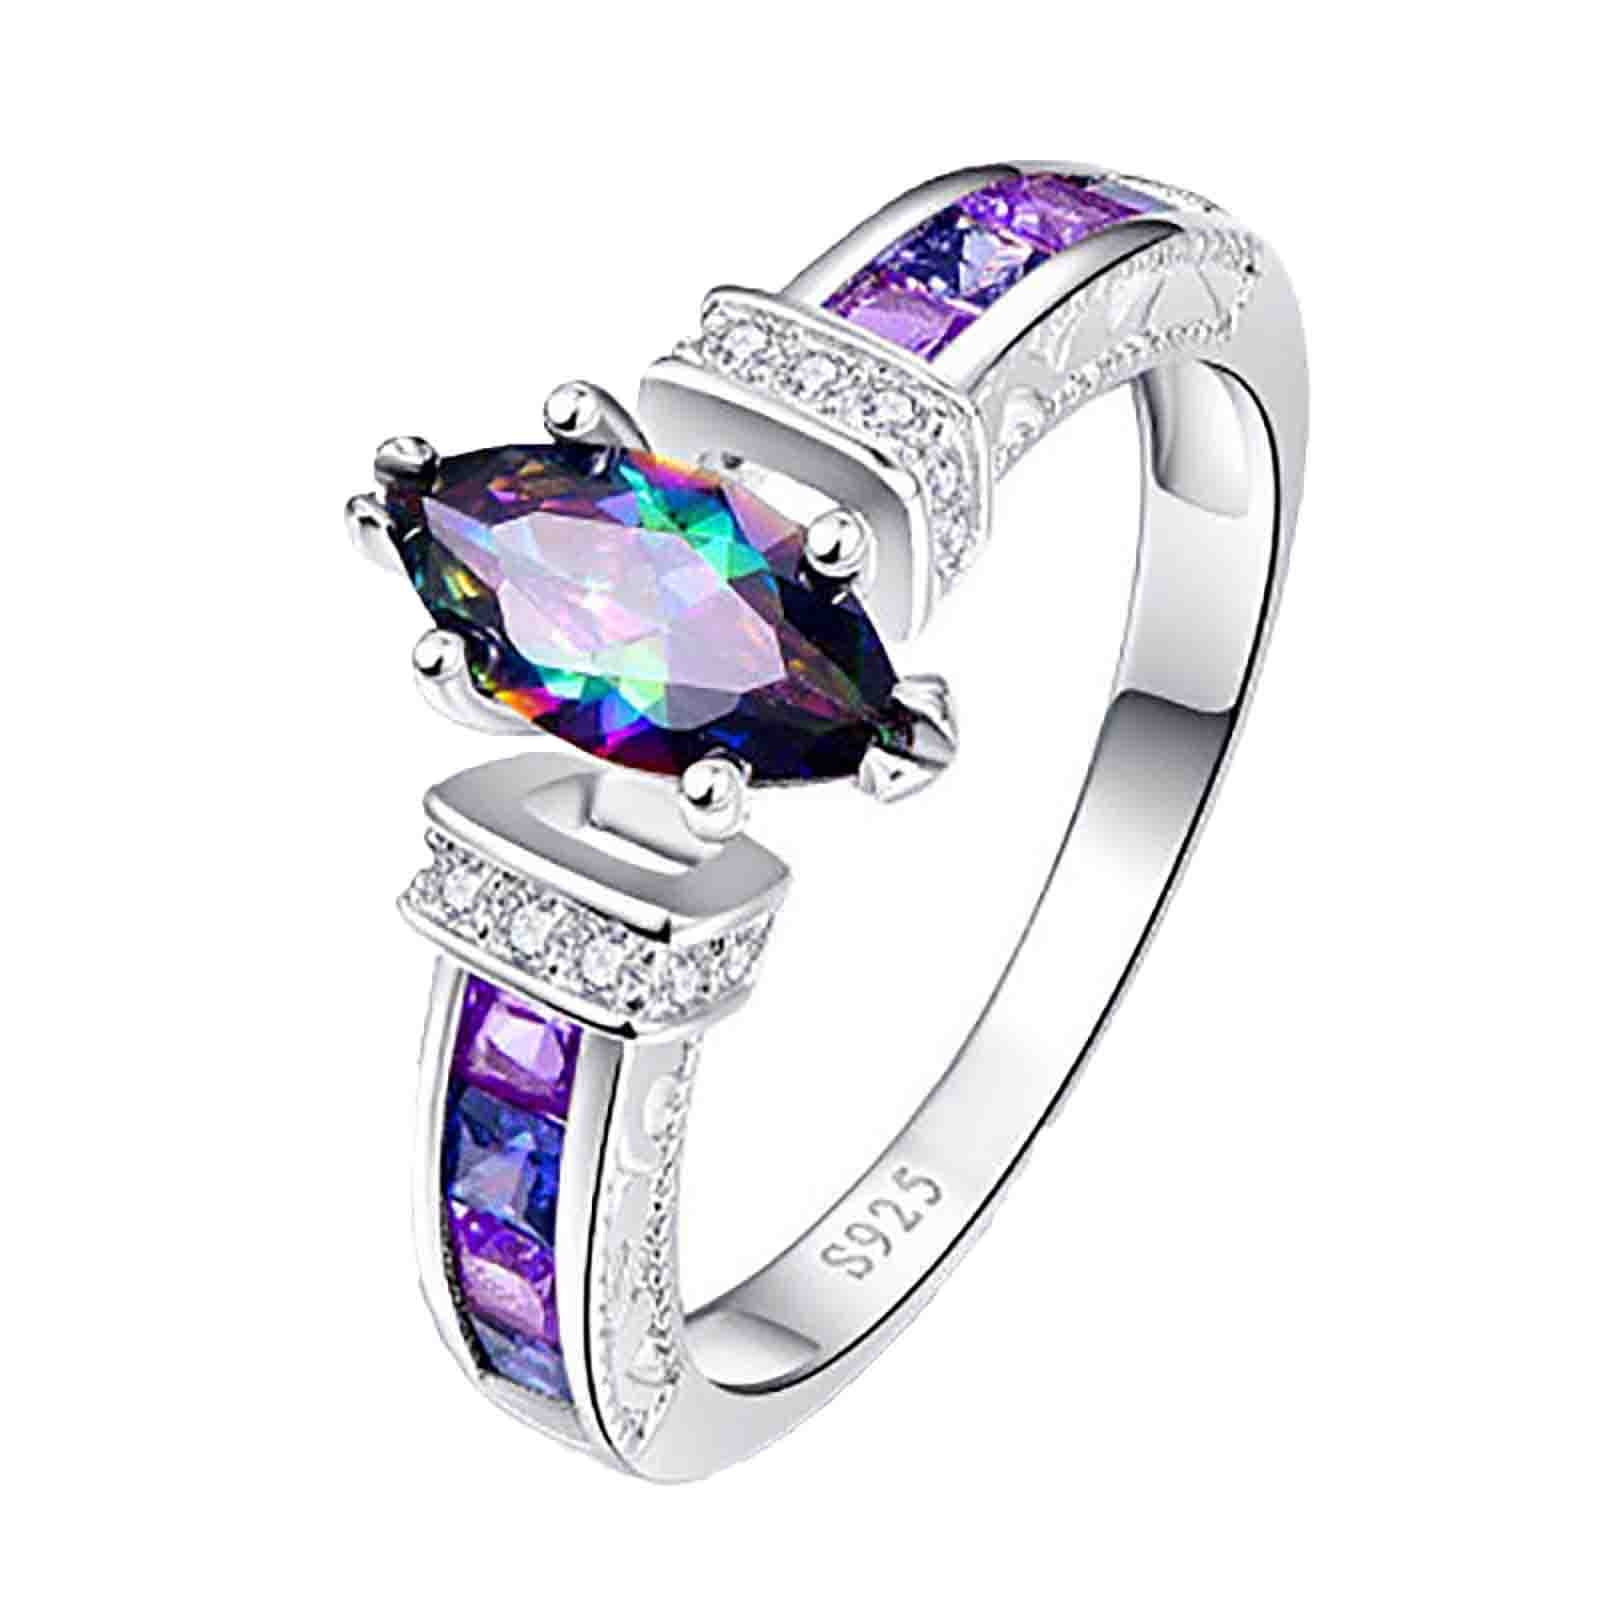 Pink Fire Opal 925 Silver Ring Women Jewelry Wedding Engagement Prom Size 6-10